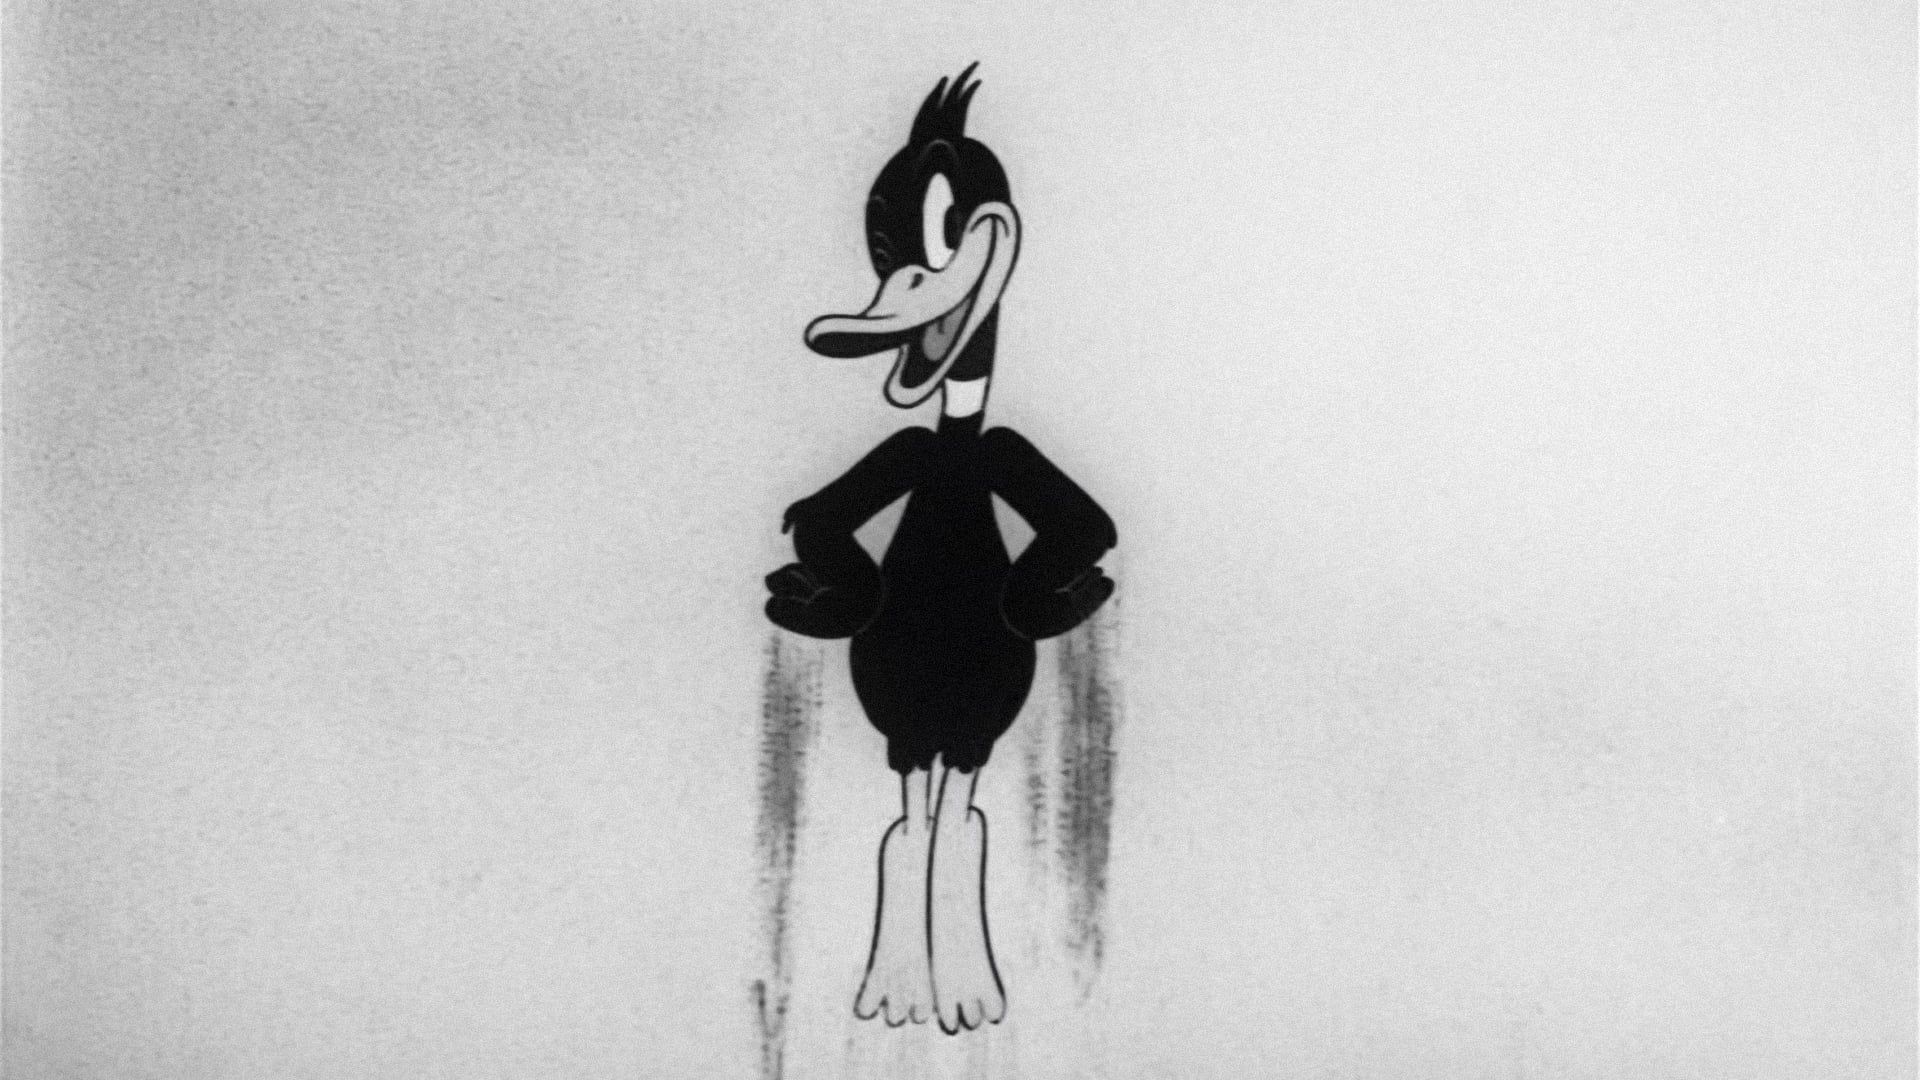 Daffy's Southern Exposure background